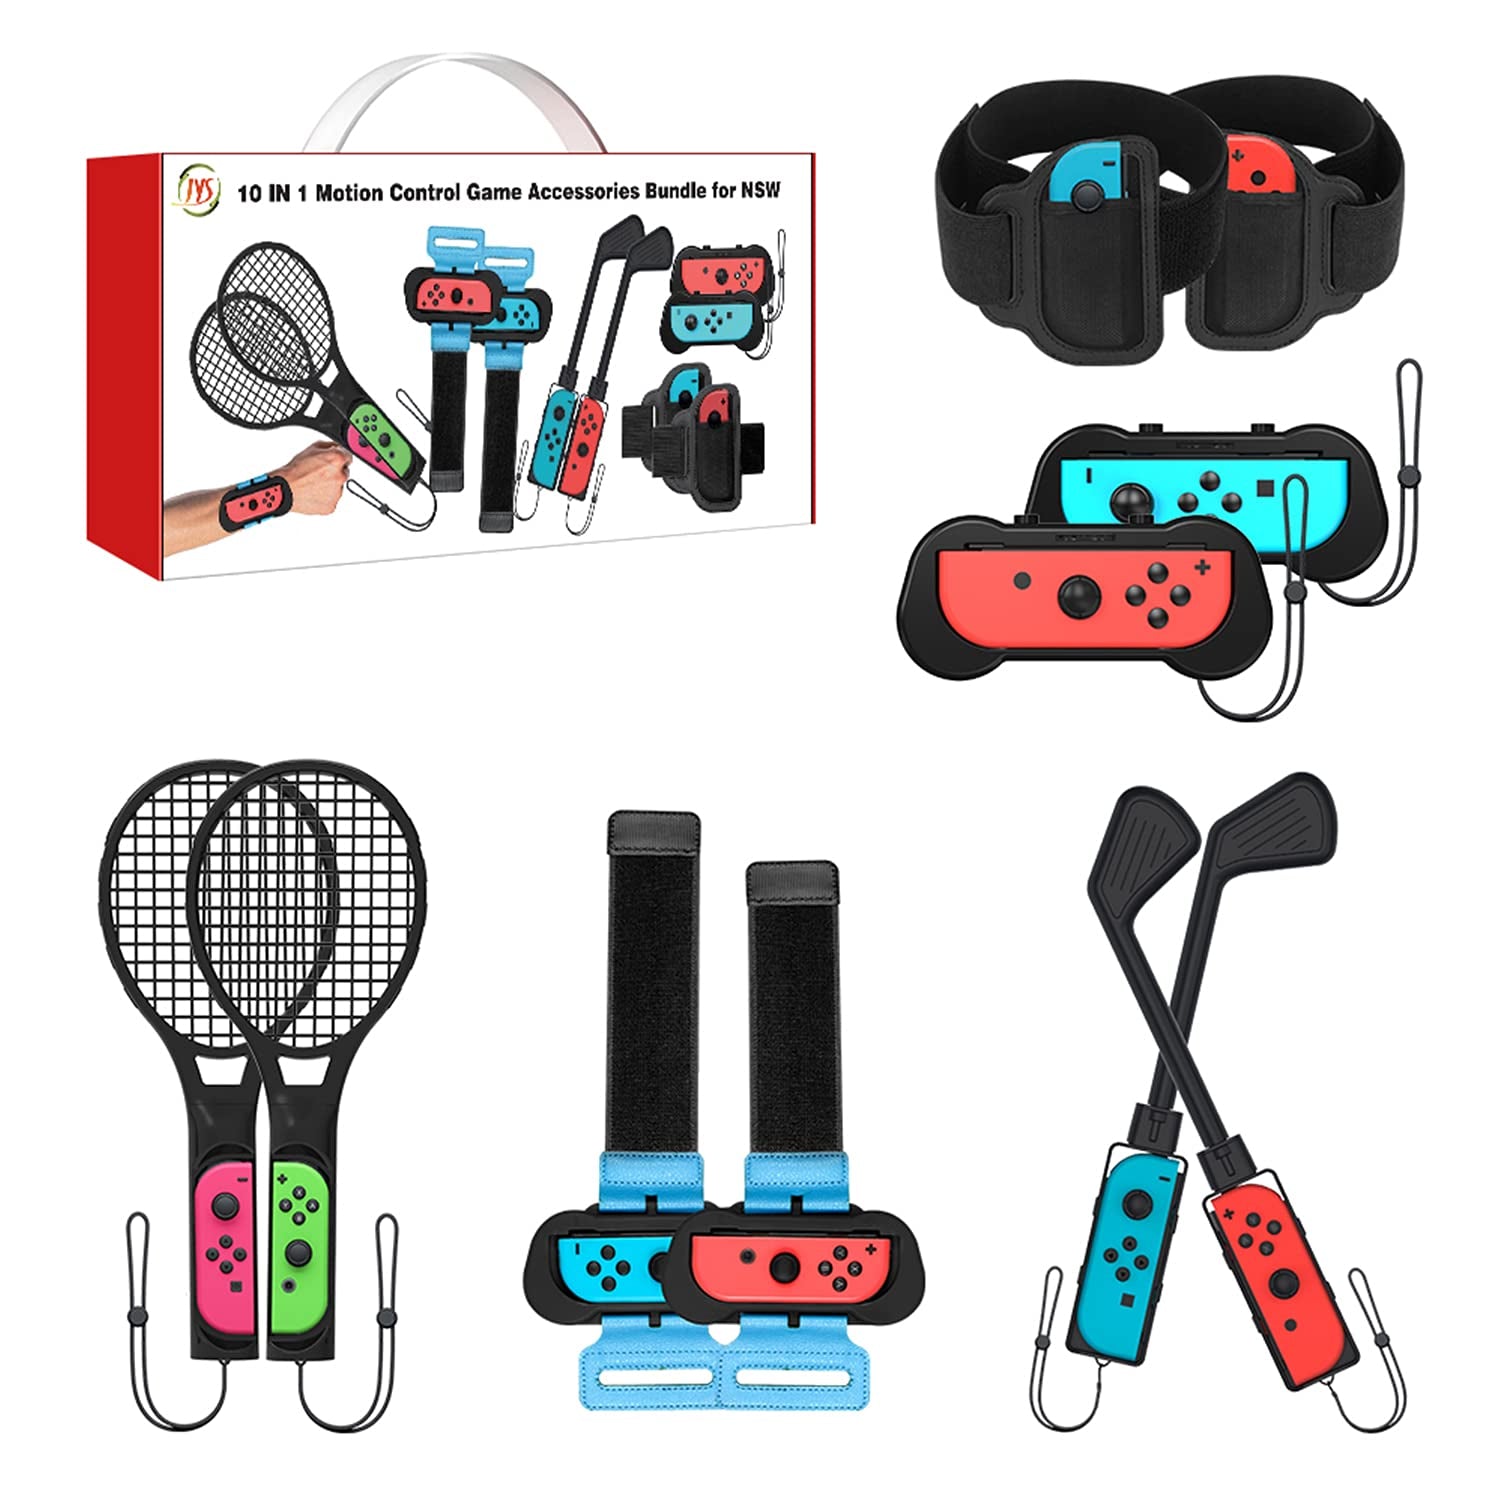 10 in1 Switch Sports Accessories Bundle, Family Kit for Nintendo Switch Sports Games, Mario Golf Golf Clubs, Just Dance Wrist Bands, Soccer Leg Straps, Tennis Rackets